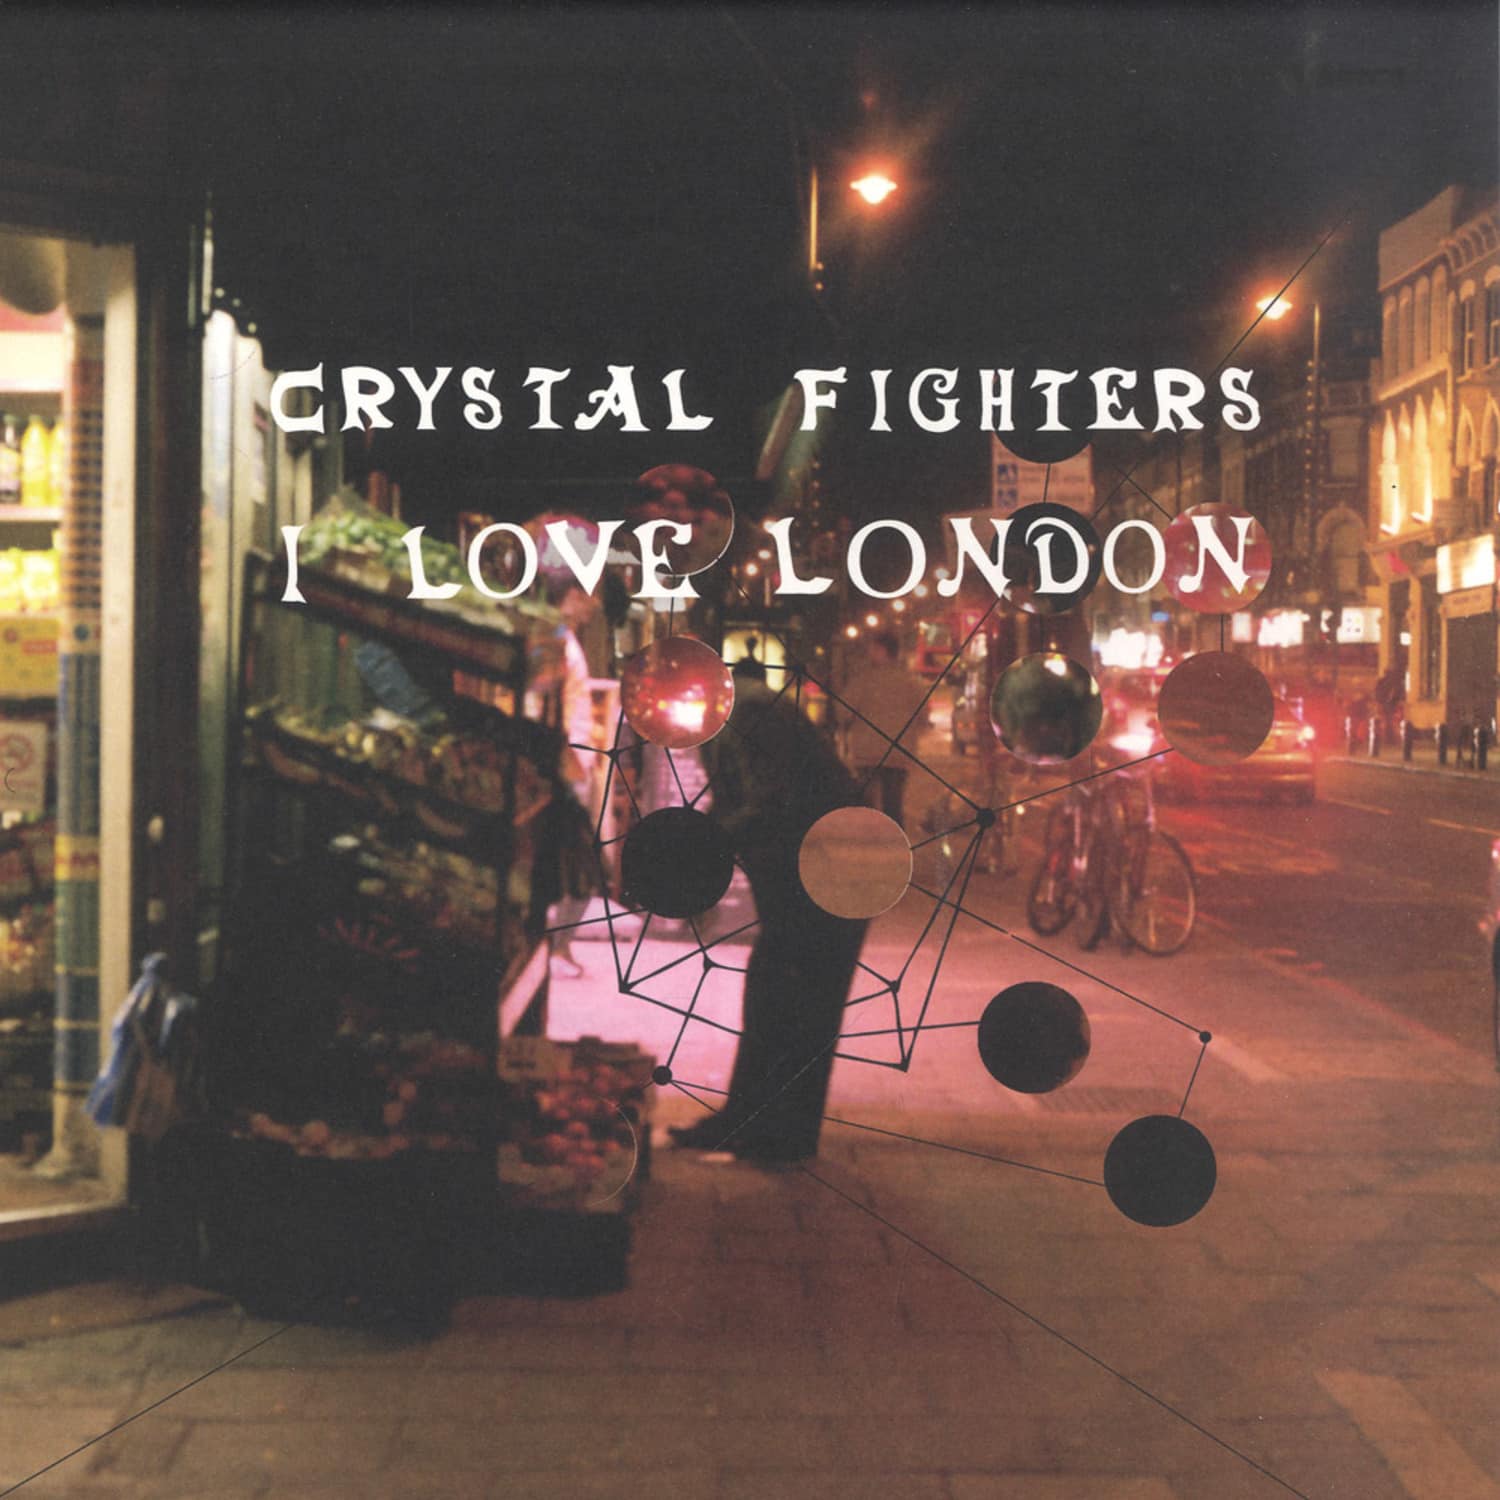 Crystal Fighters - I LOVE LONDON